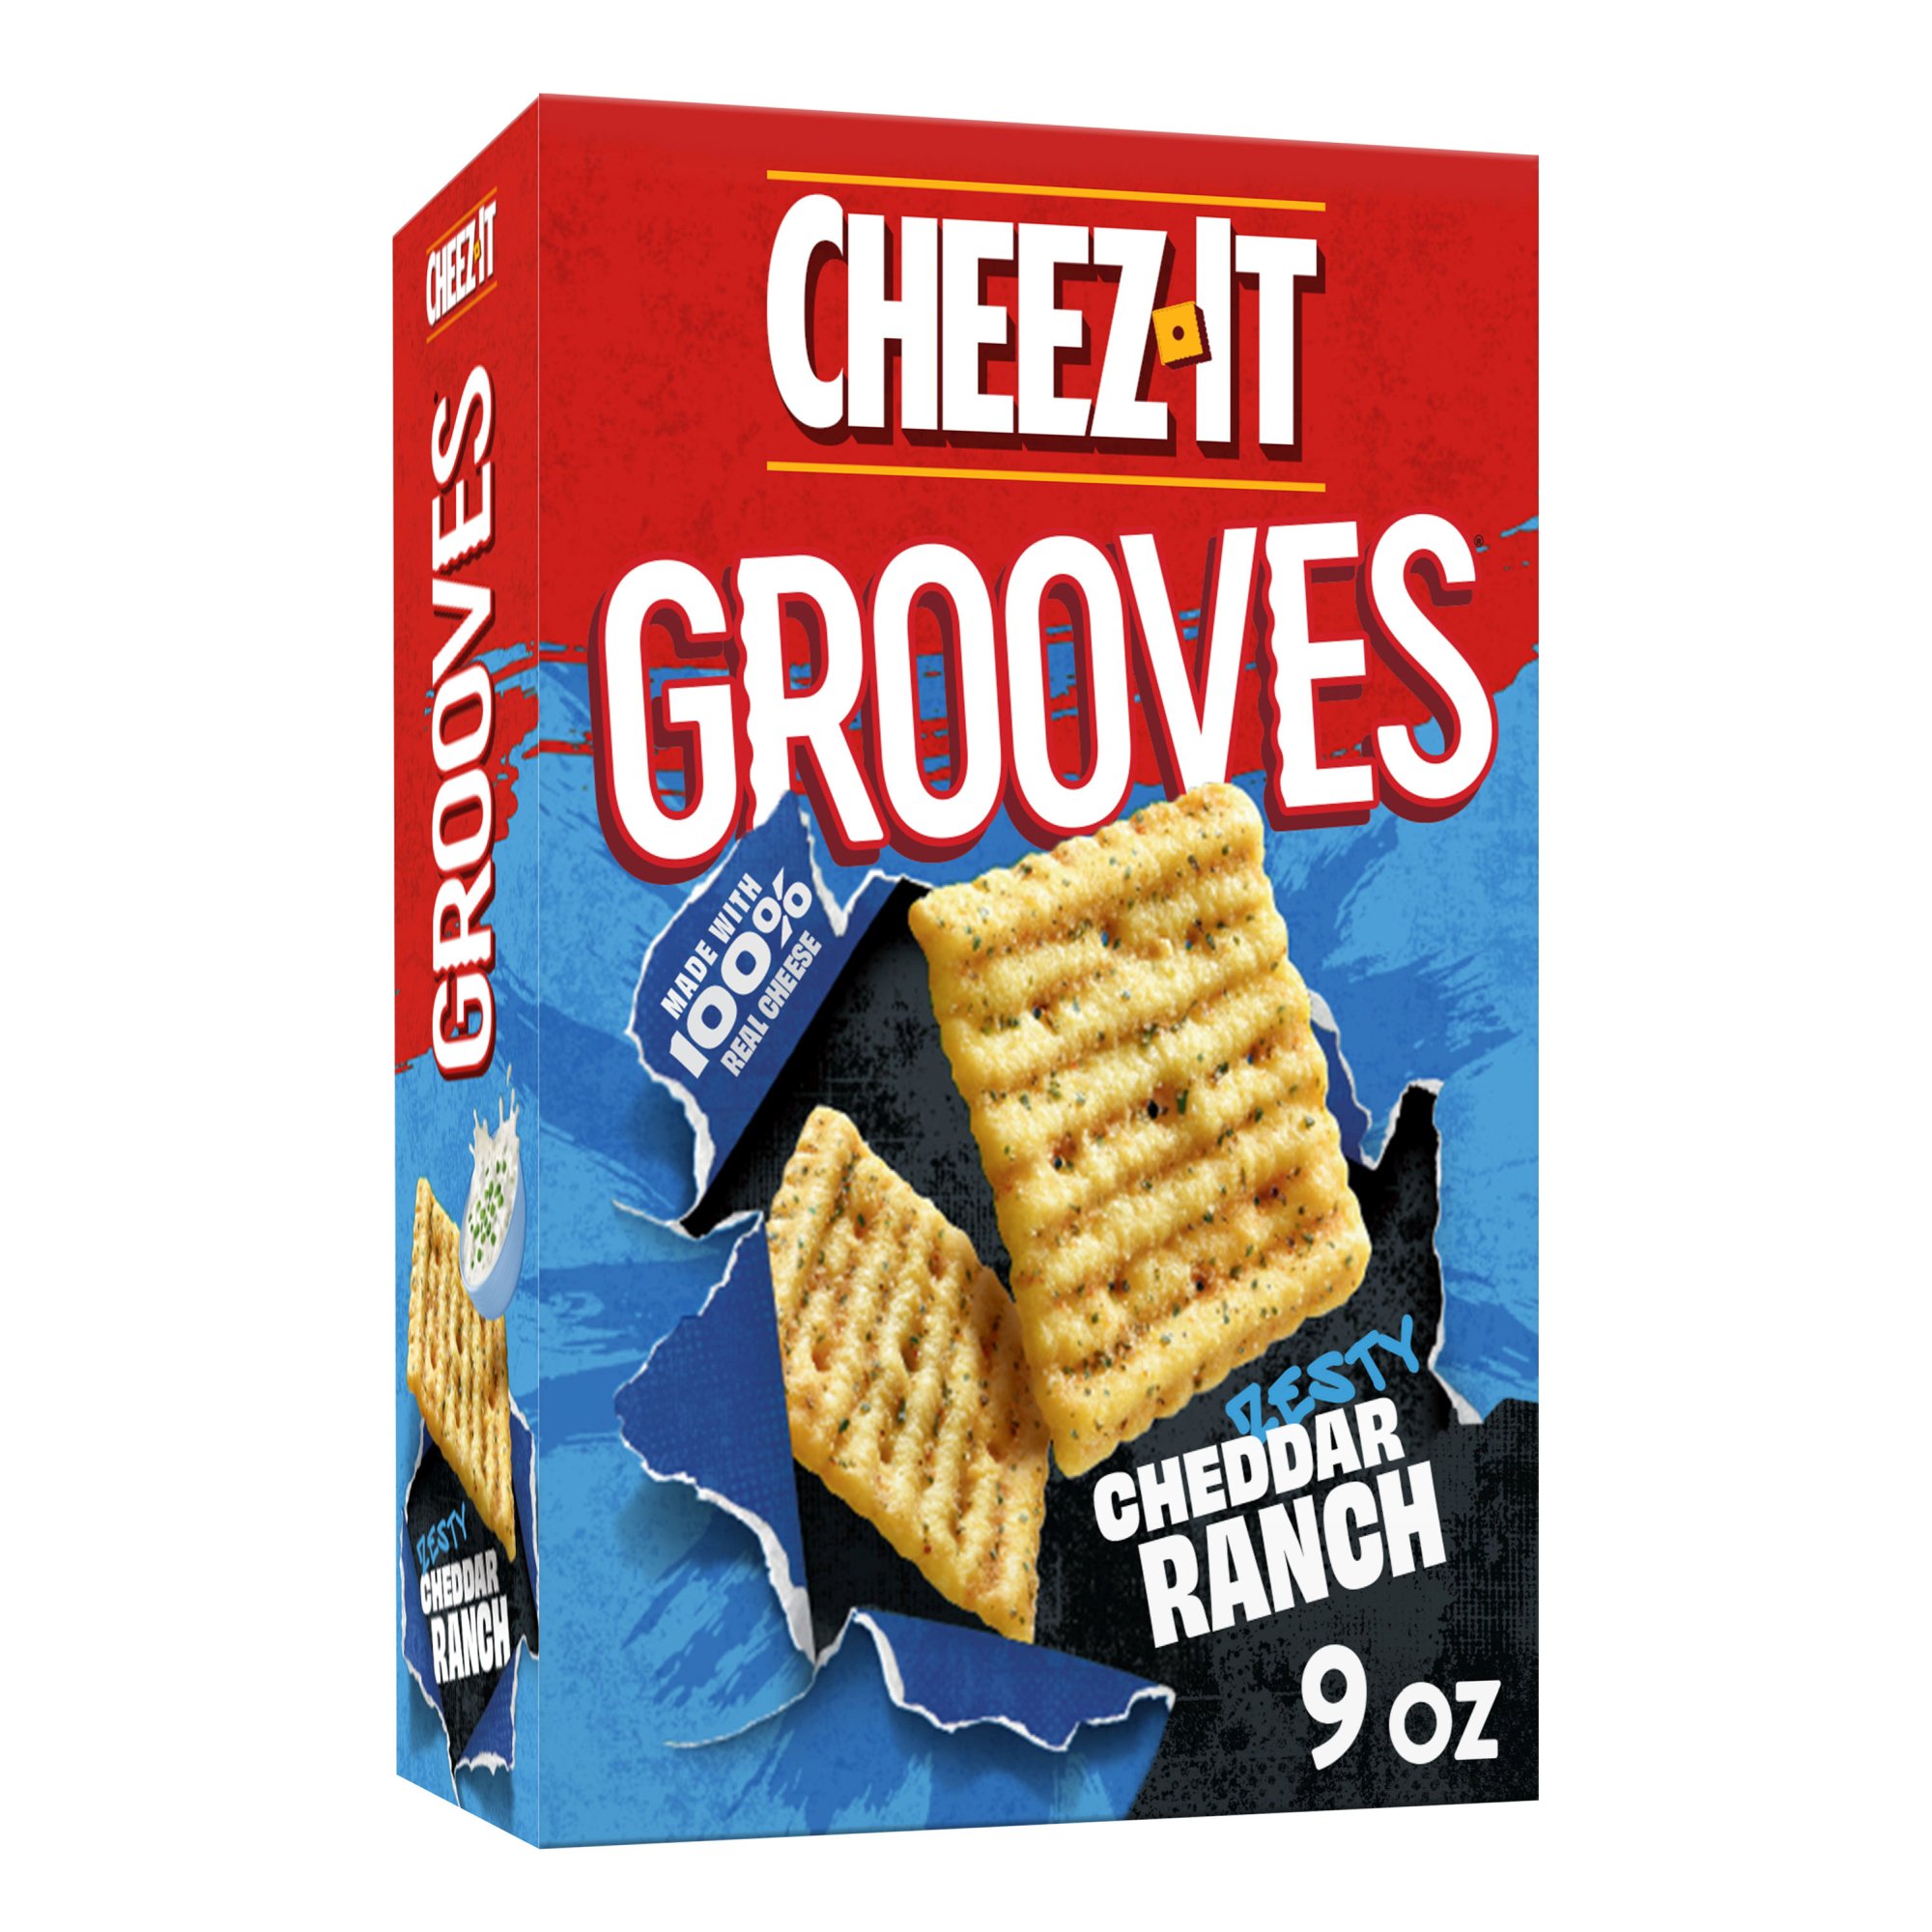 Sunshine Cheez It Grooves Zesty Cheddar Ranch Crackers Shop